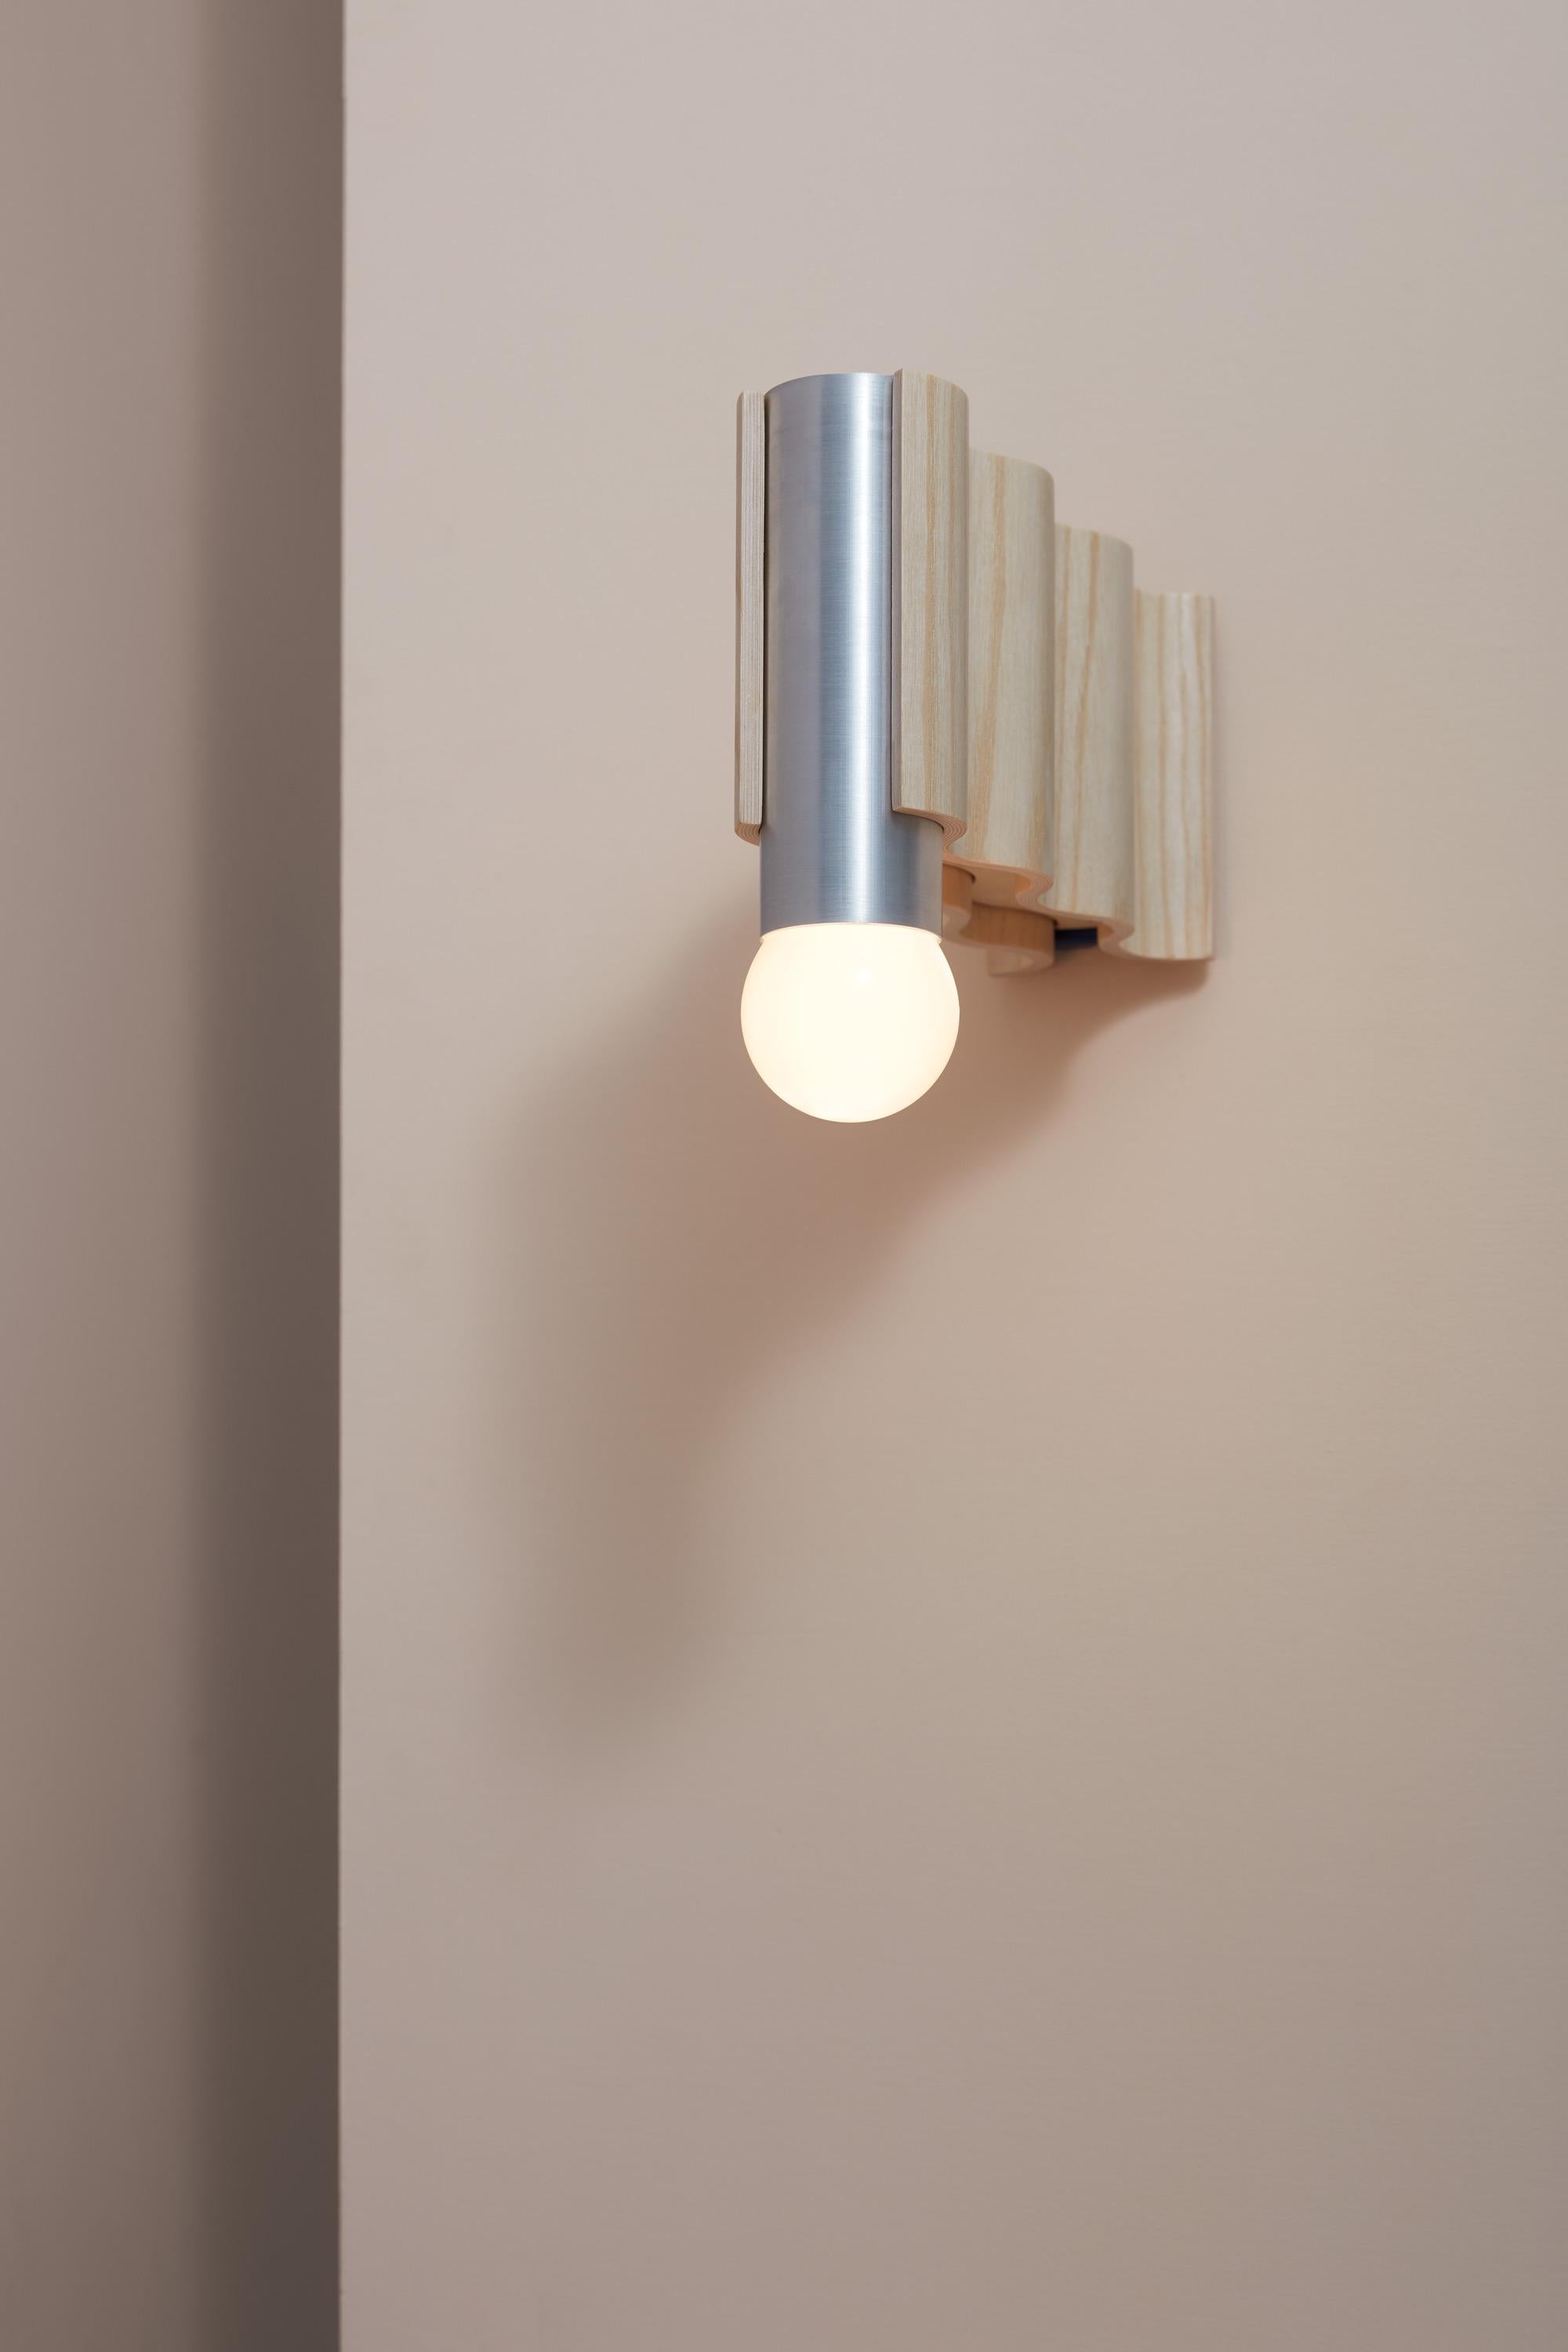 Mid-Century Modern Single Spot Corrugation Sconce / Wall Light in Natural Ash and Brushed Aluminium For Sale